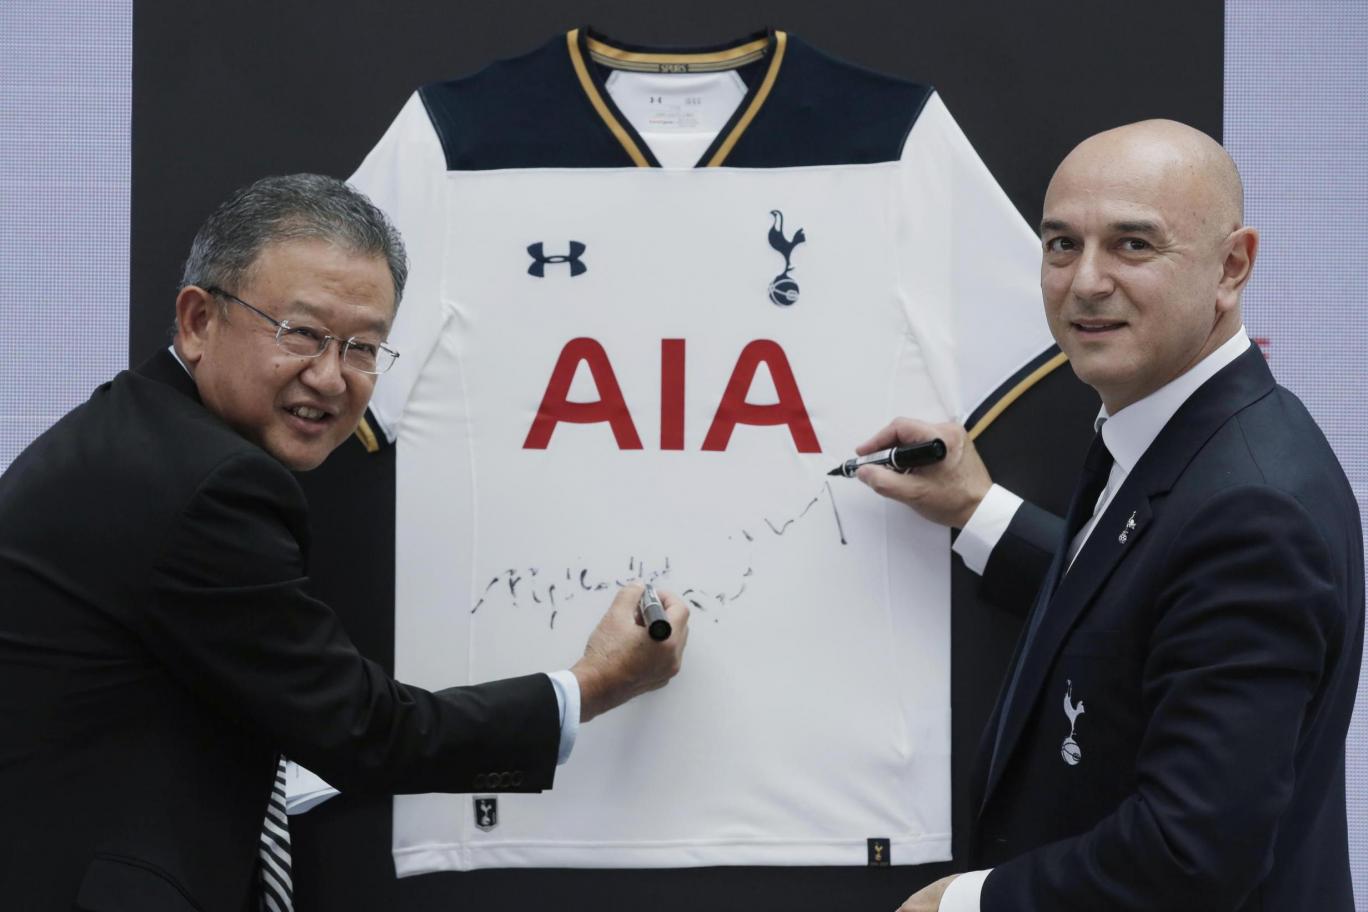 Tottenham And AIA - A New Sponsorship Deal Announced